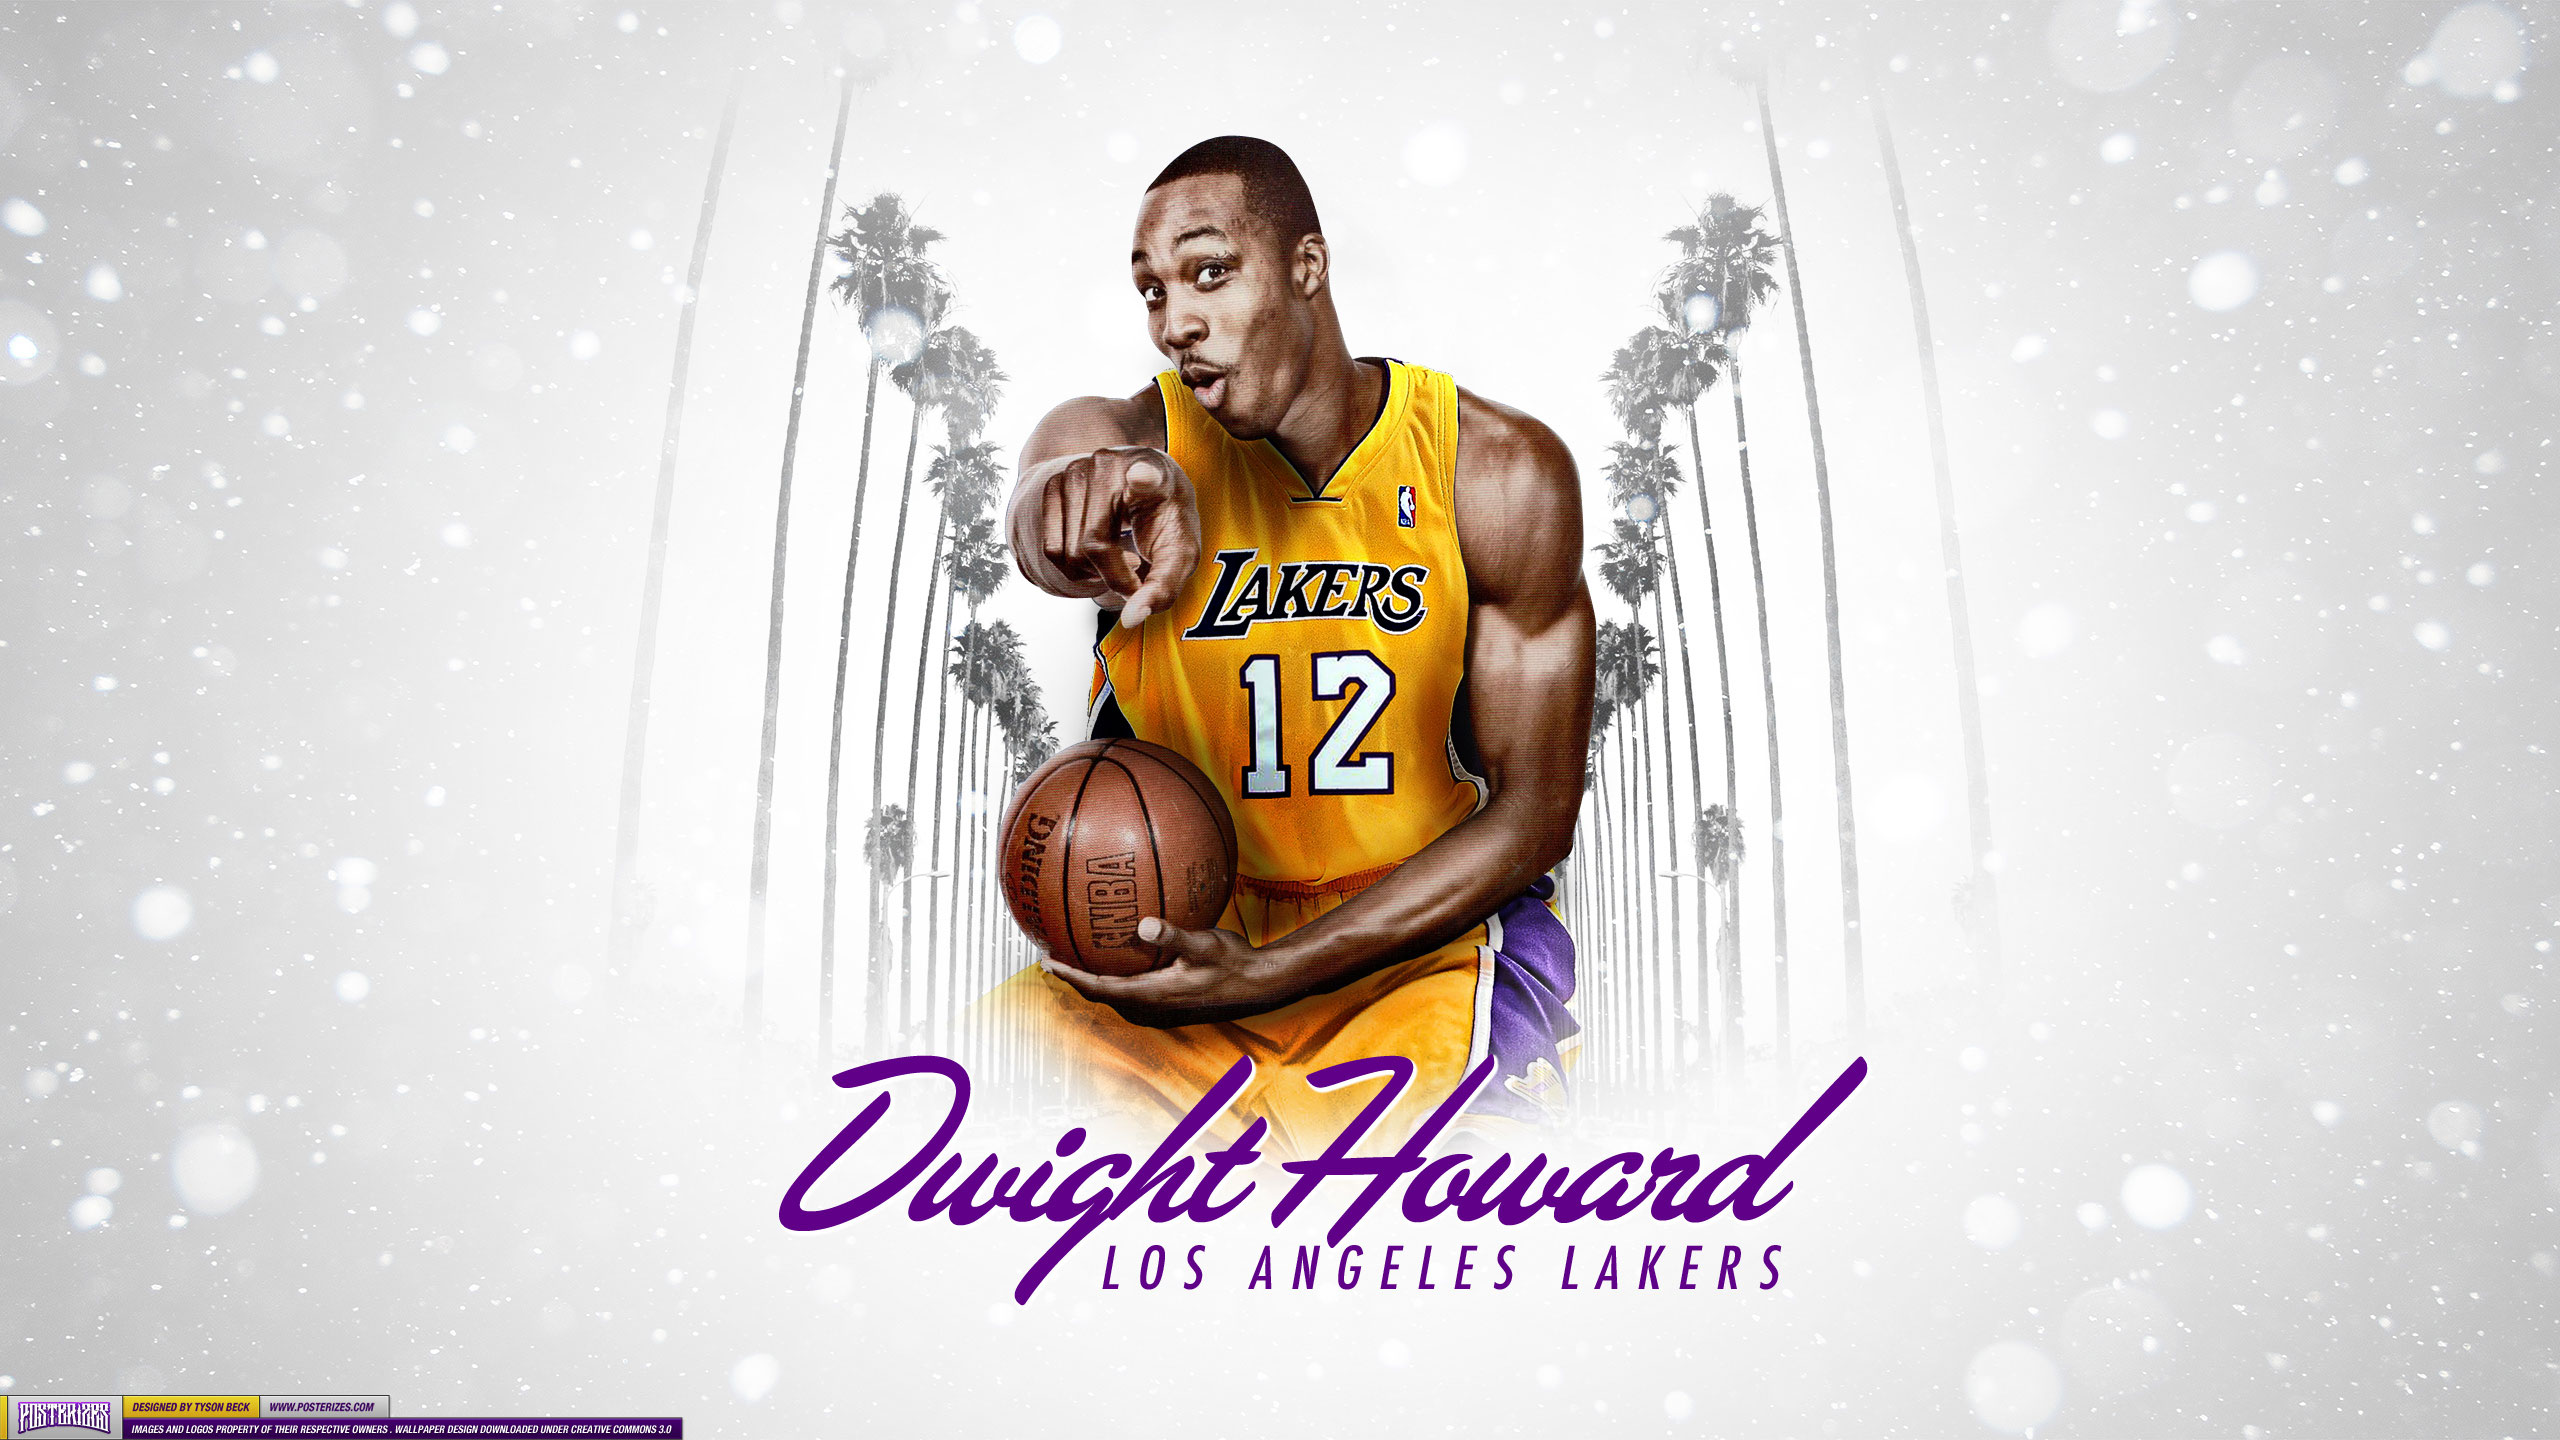 Lakers k wallpapers for your desktop or mobile screen free and easy to download